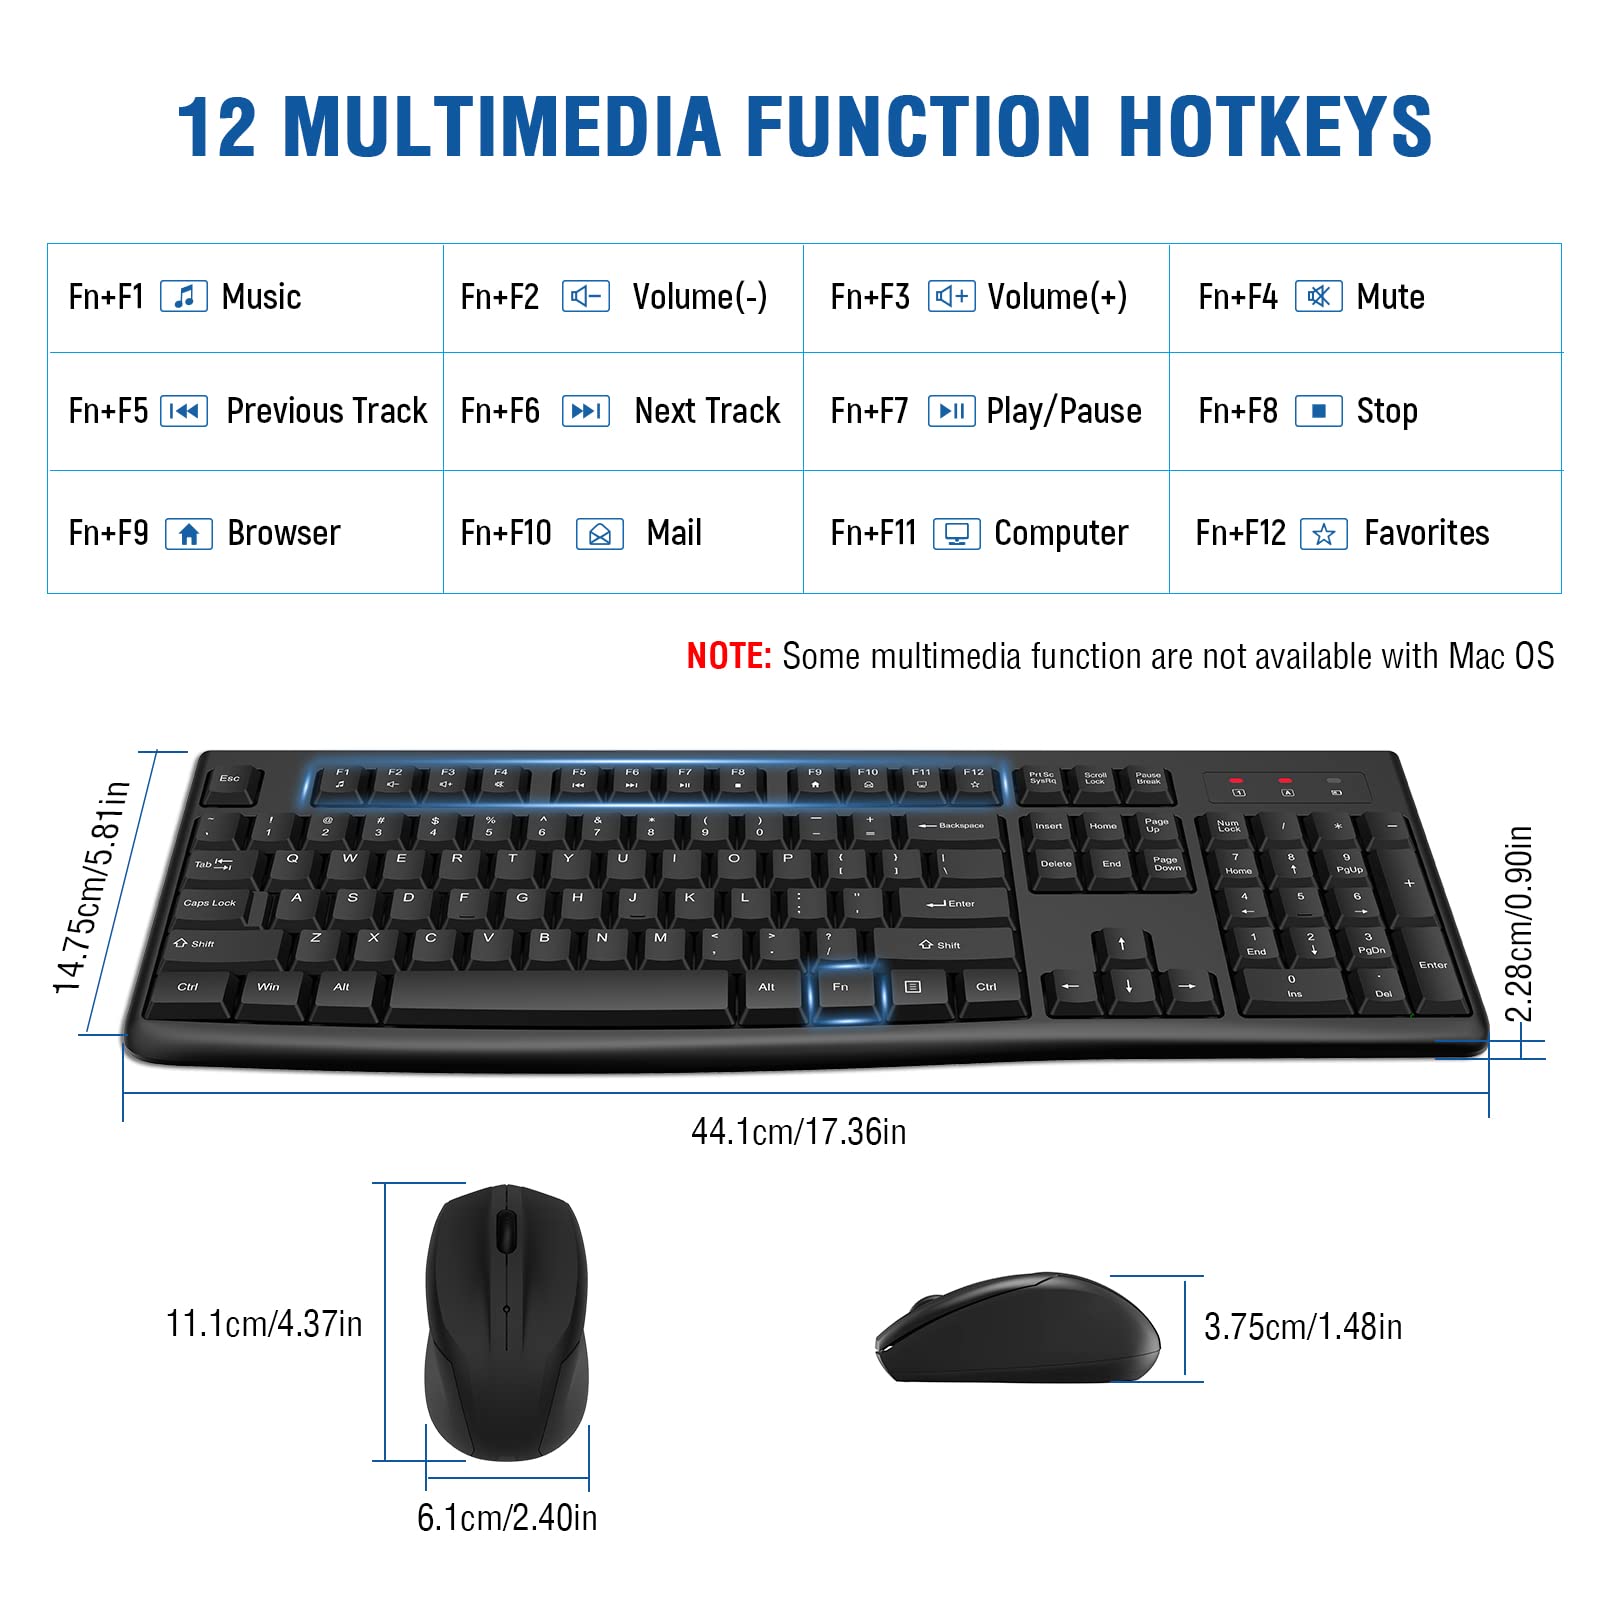 Wireless Keyboard and Mouse Combo, EDJO Full-Sized 2.4GHz USB Computer Wireless Keyboard and Wireless Optical Mouse for Windows, Mac, Laptop/Desktop/PC